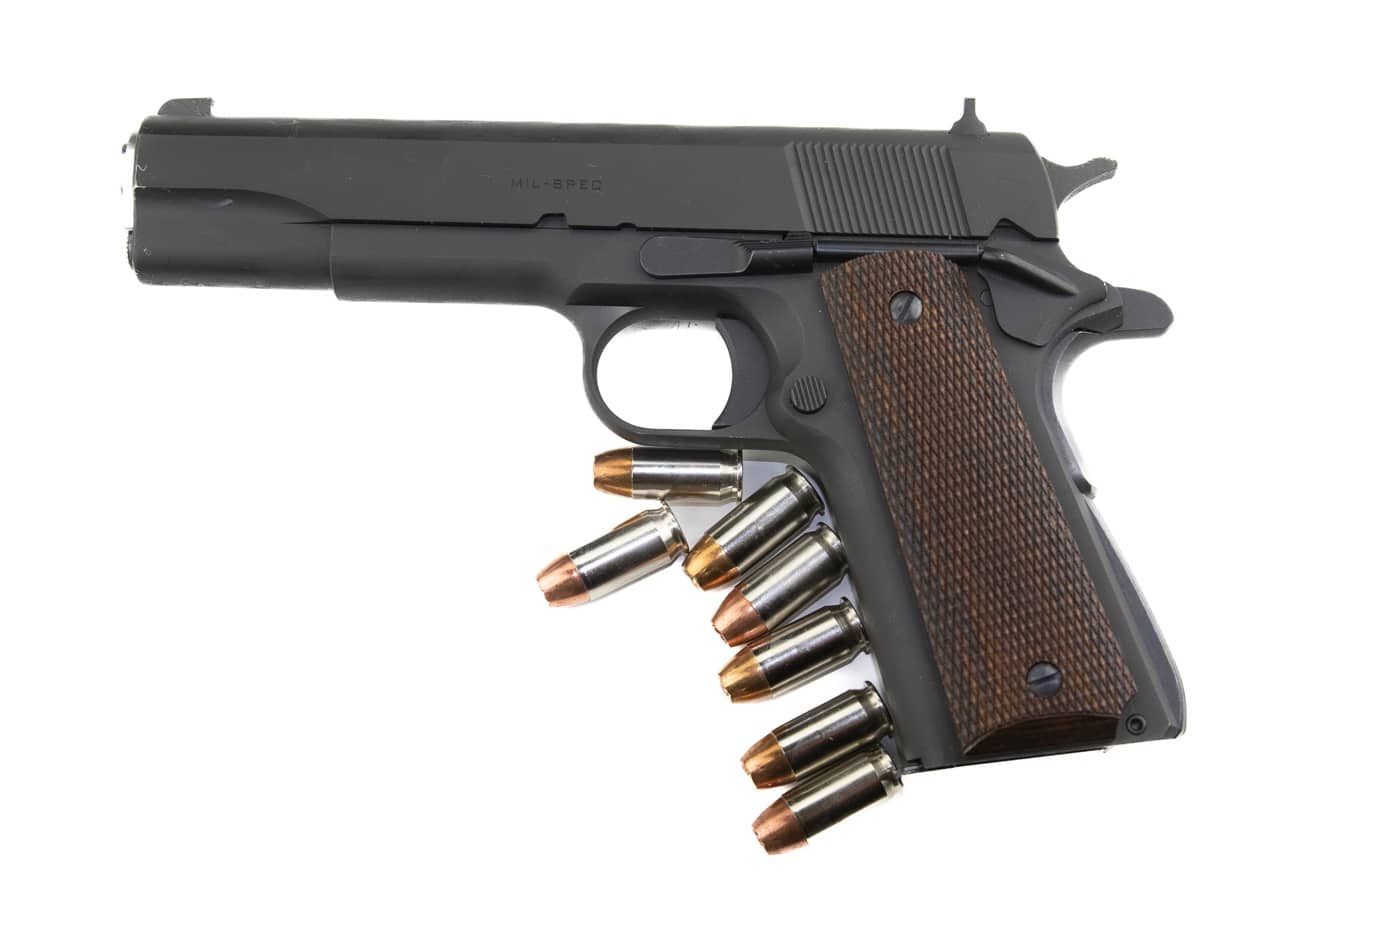 This photo is an author made representation of carry in Condition 3. The reason many people like this way to carry the 1911 is because of Israel. To prevent problems with a range of questionably made firearms to contend with, the Israeli Army adopted this as the carry conditions of readiness for defensive use. This prevents many of the issues associated with half-cock and worn out sears. It does require running the pistol slide after drawing it from a handgun holster.